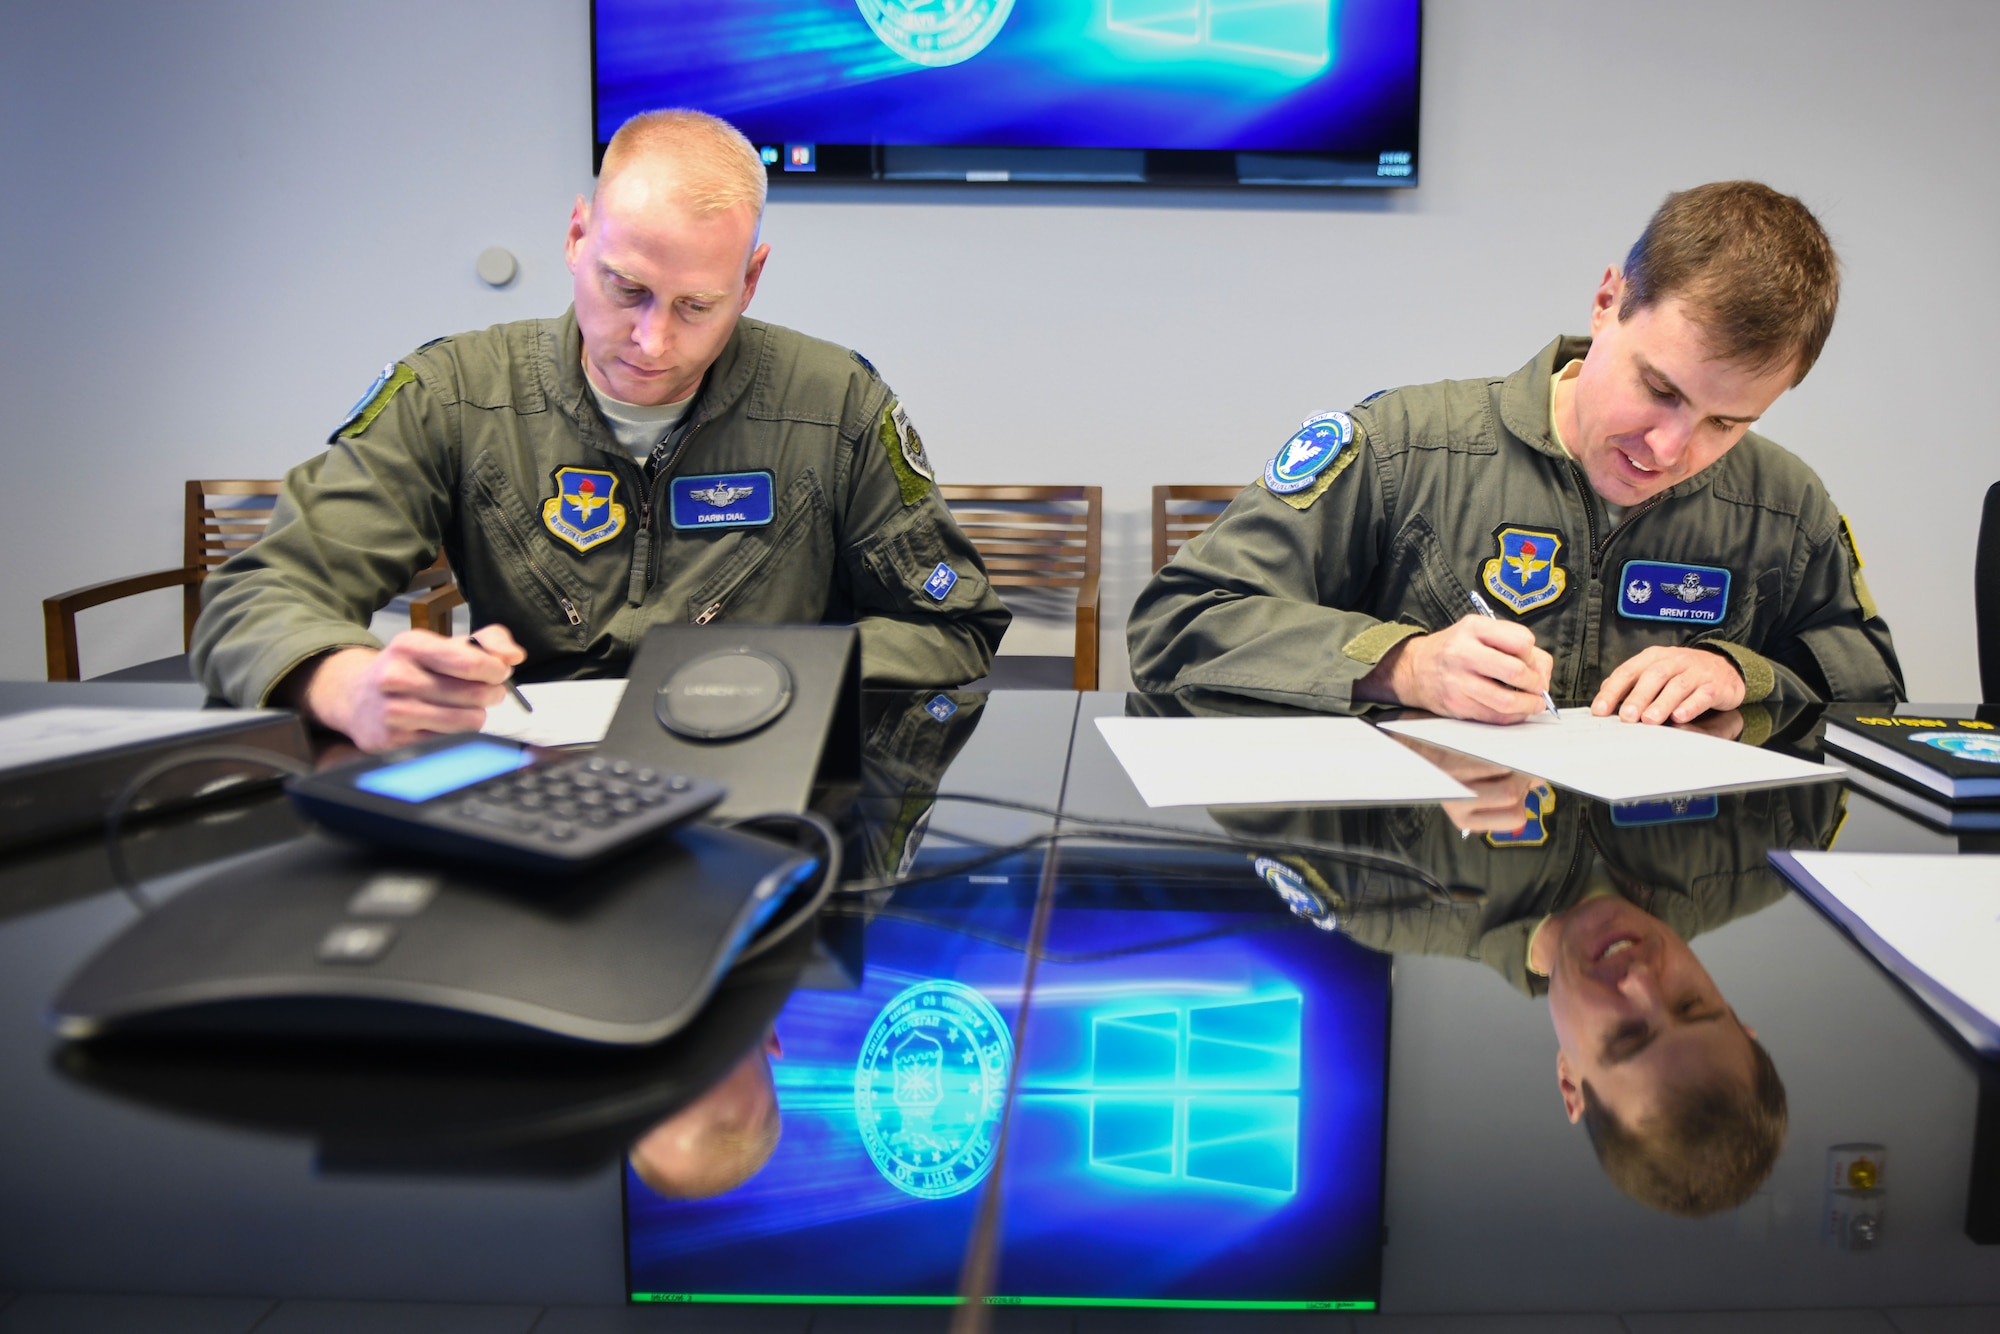 U.S. Air Force Lt. Col. Darin Dial, 56th Air Refueling Squadron director of operations, and Lt. Col. Brent Toth, 56th ARS commander, sign the first set of flight orders for the incoming KC-46A Pegasus, Feb. 4, 2019, at Altus Air Force Base, Okla. The 56th ARS will conduct training for the pilots and boom operators of the KC-46. (U.S. Air Force photo by Airman 1st Class Jeremy Wentworth)